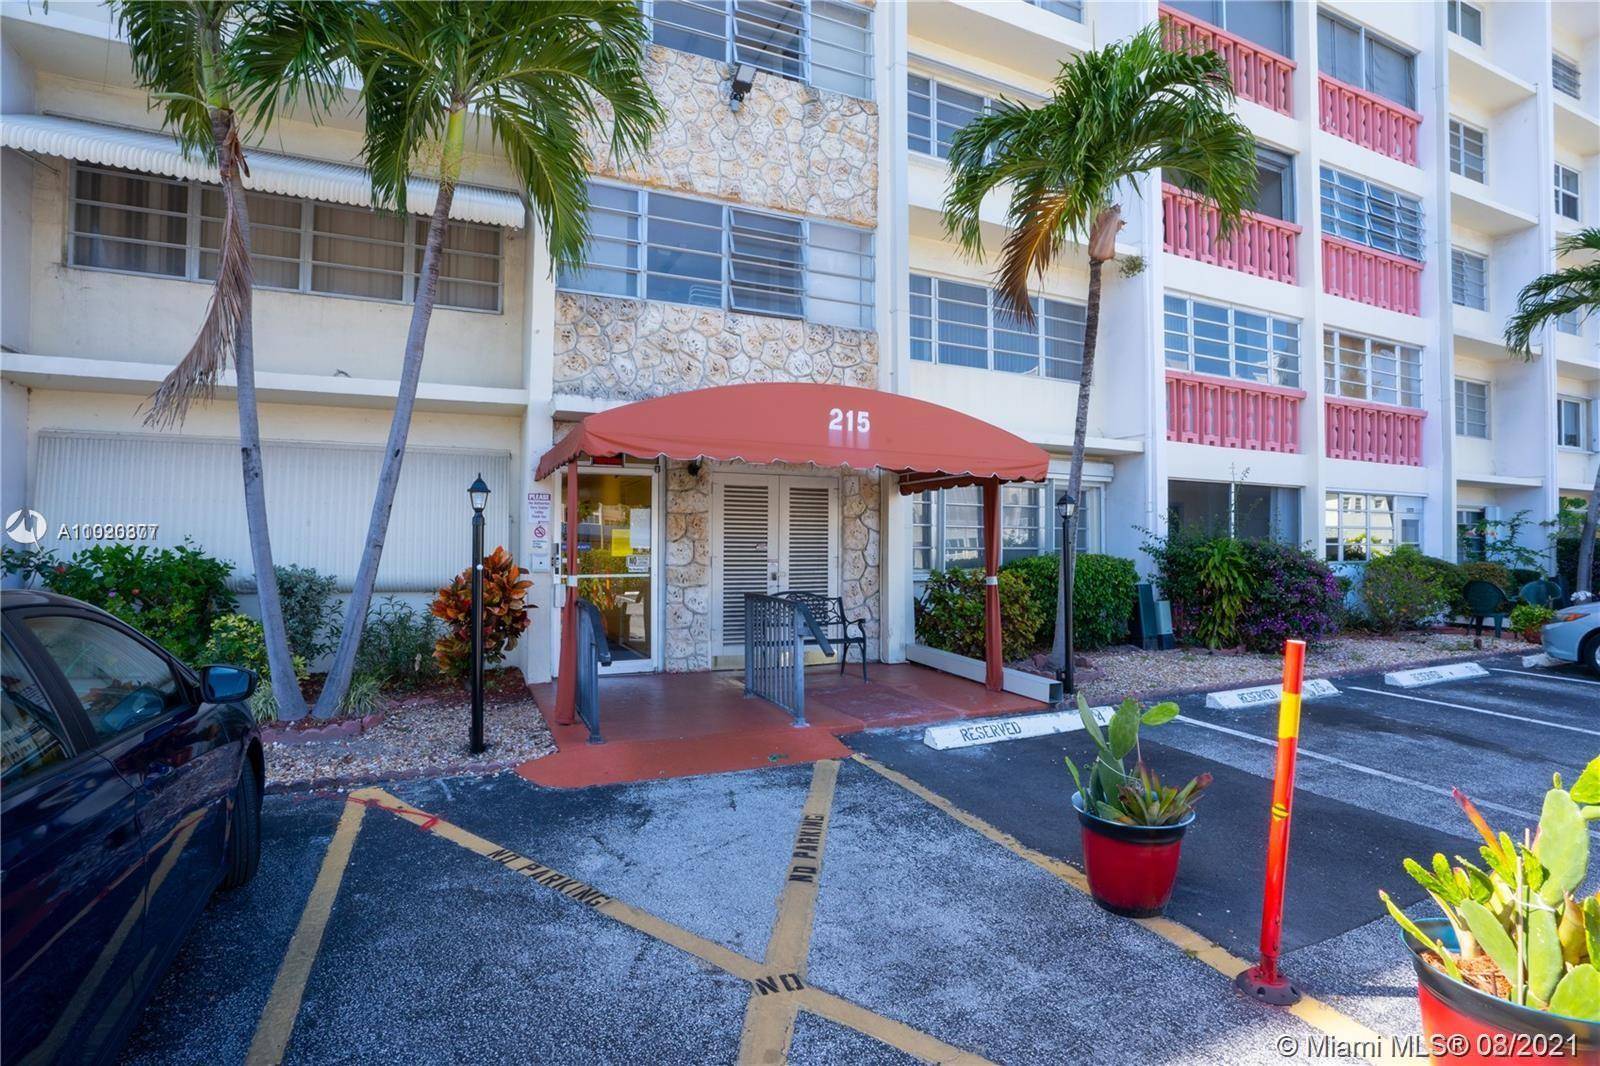 Large renovated 2 bedroom den penthouse located in Hallandale Beach Blvd near the Gulfstream Racetrack and Casino.